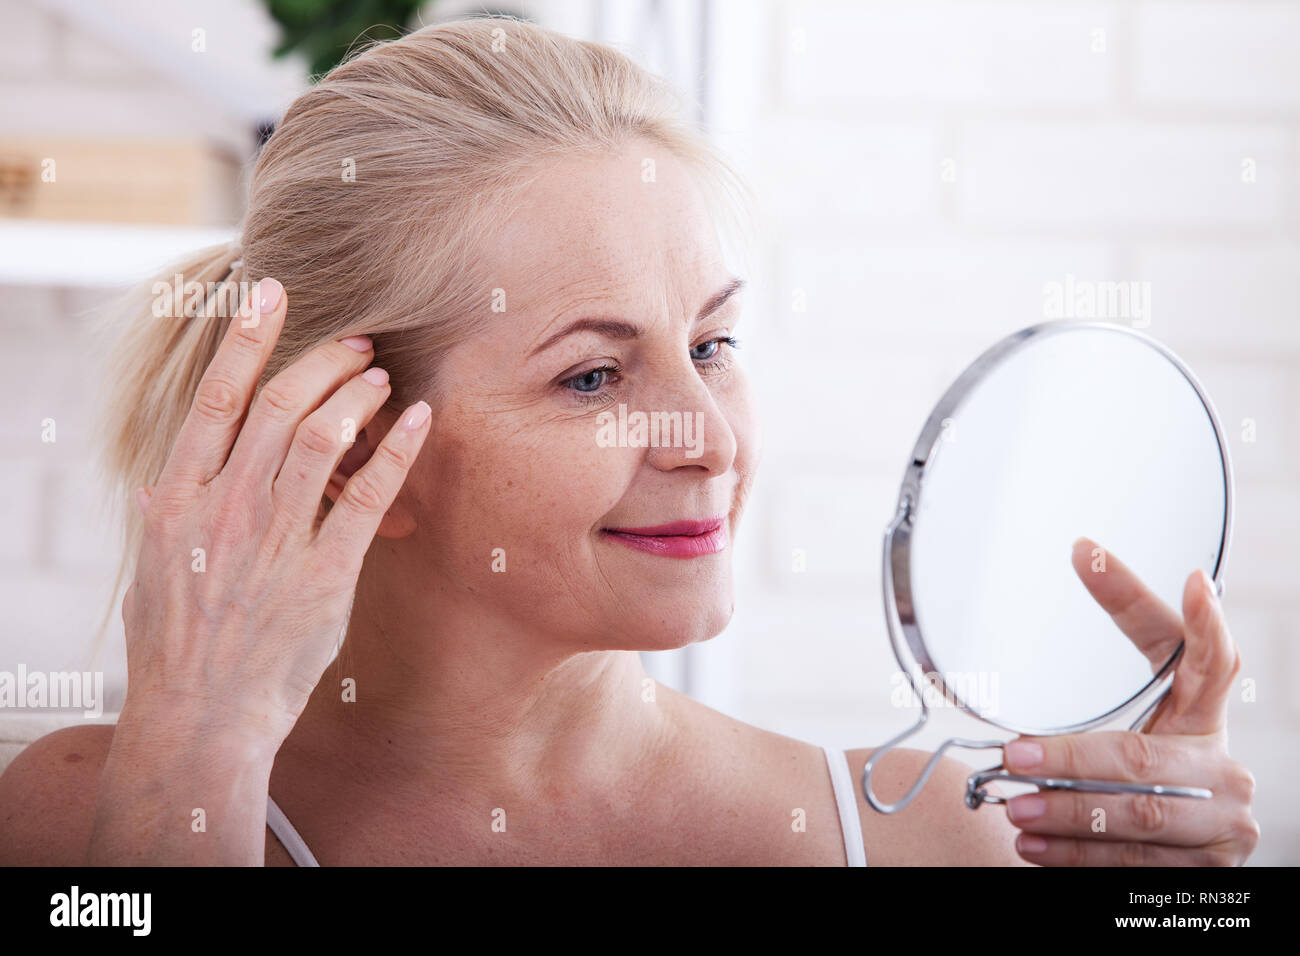 Middle aged woman looking at wrinkles in mirror. Plastic surgery and collagen injections. Makeup. Macro face. Selective focus on the face. Realistic images with their own imperfections. Stock Photo